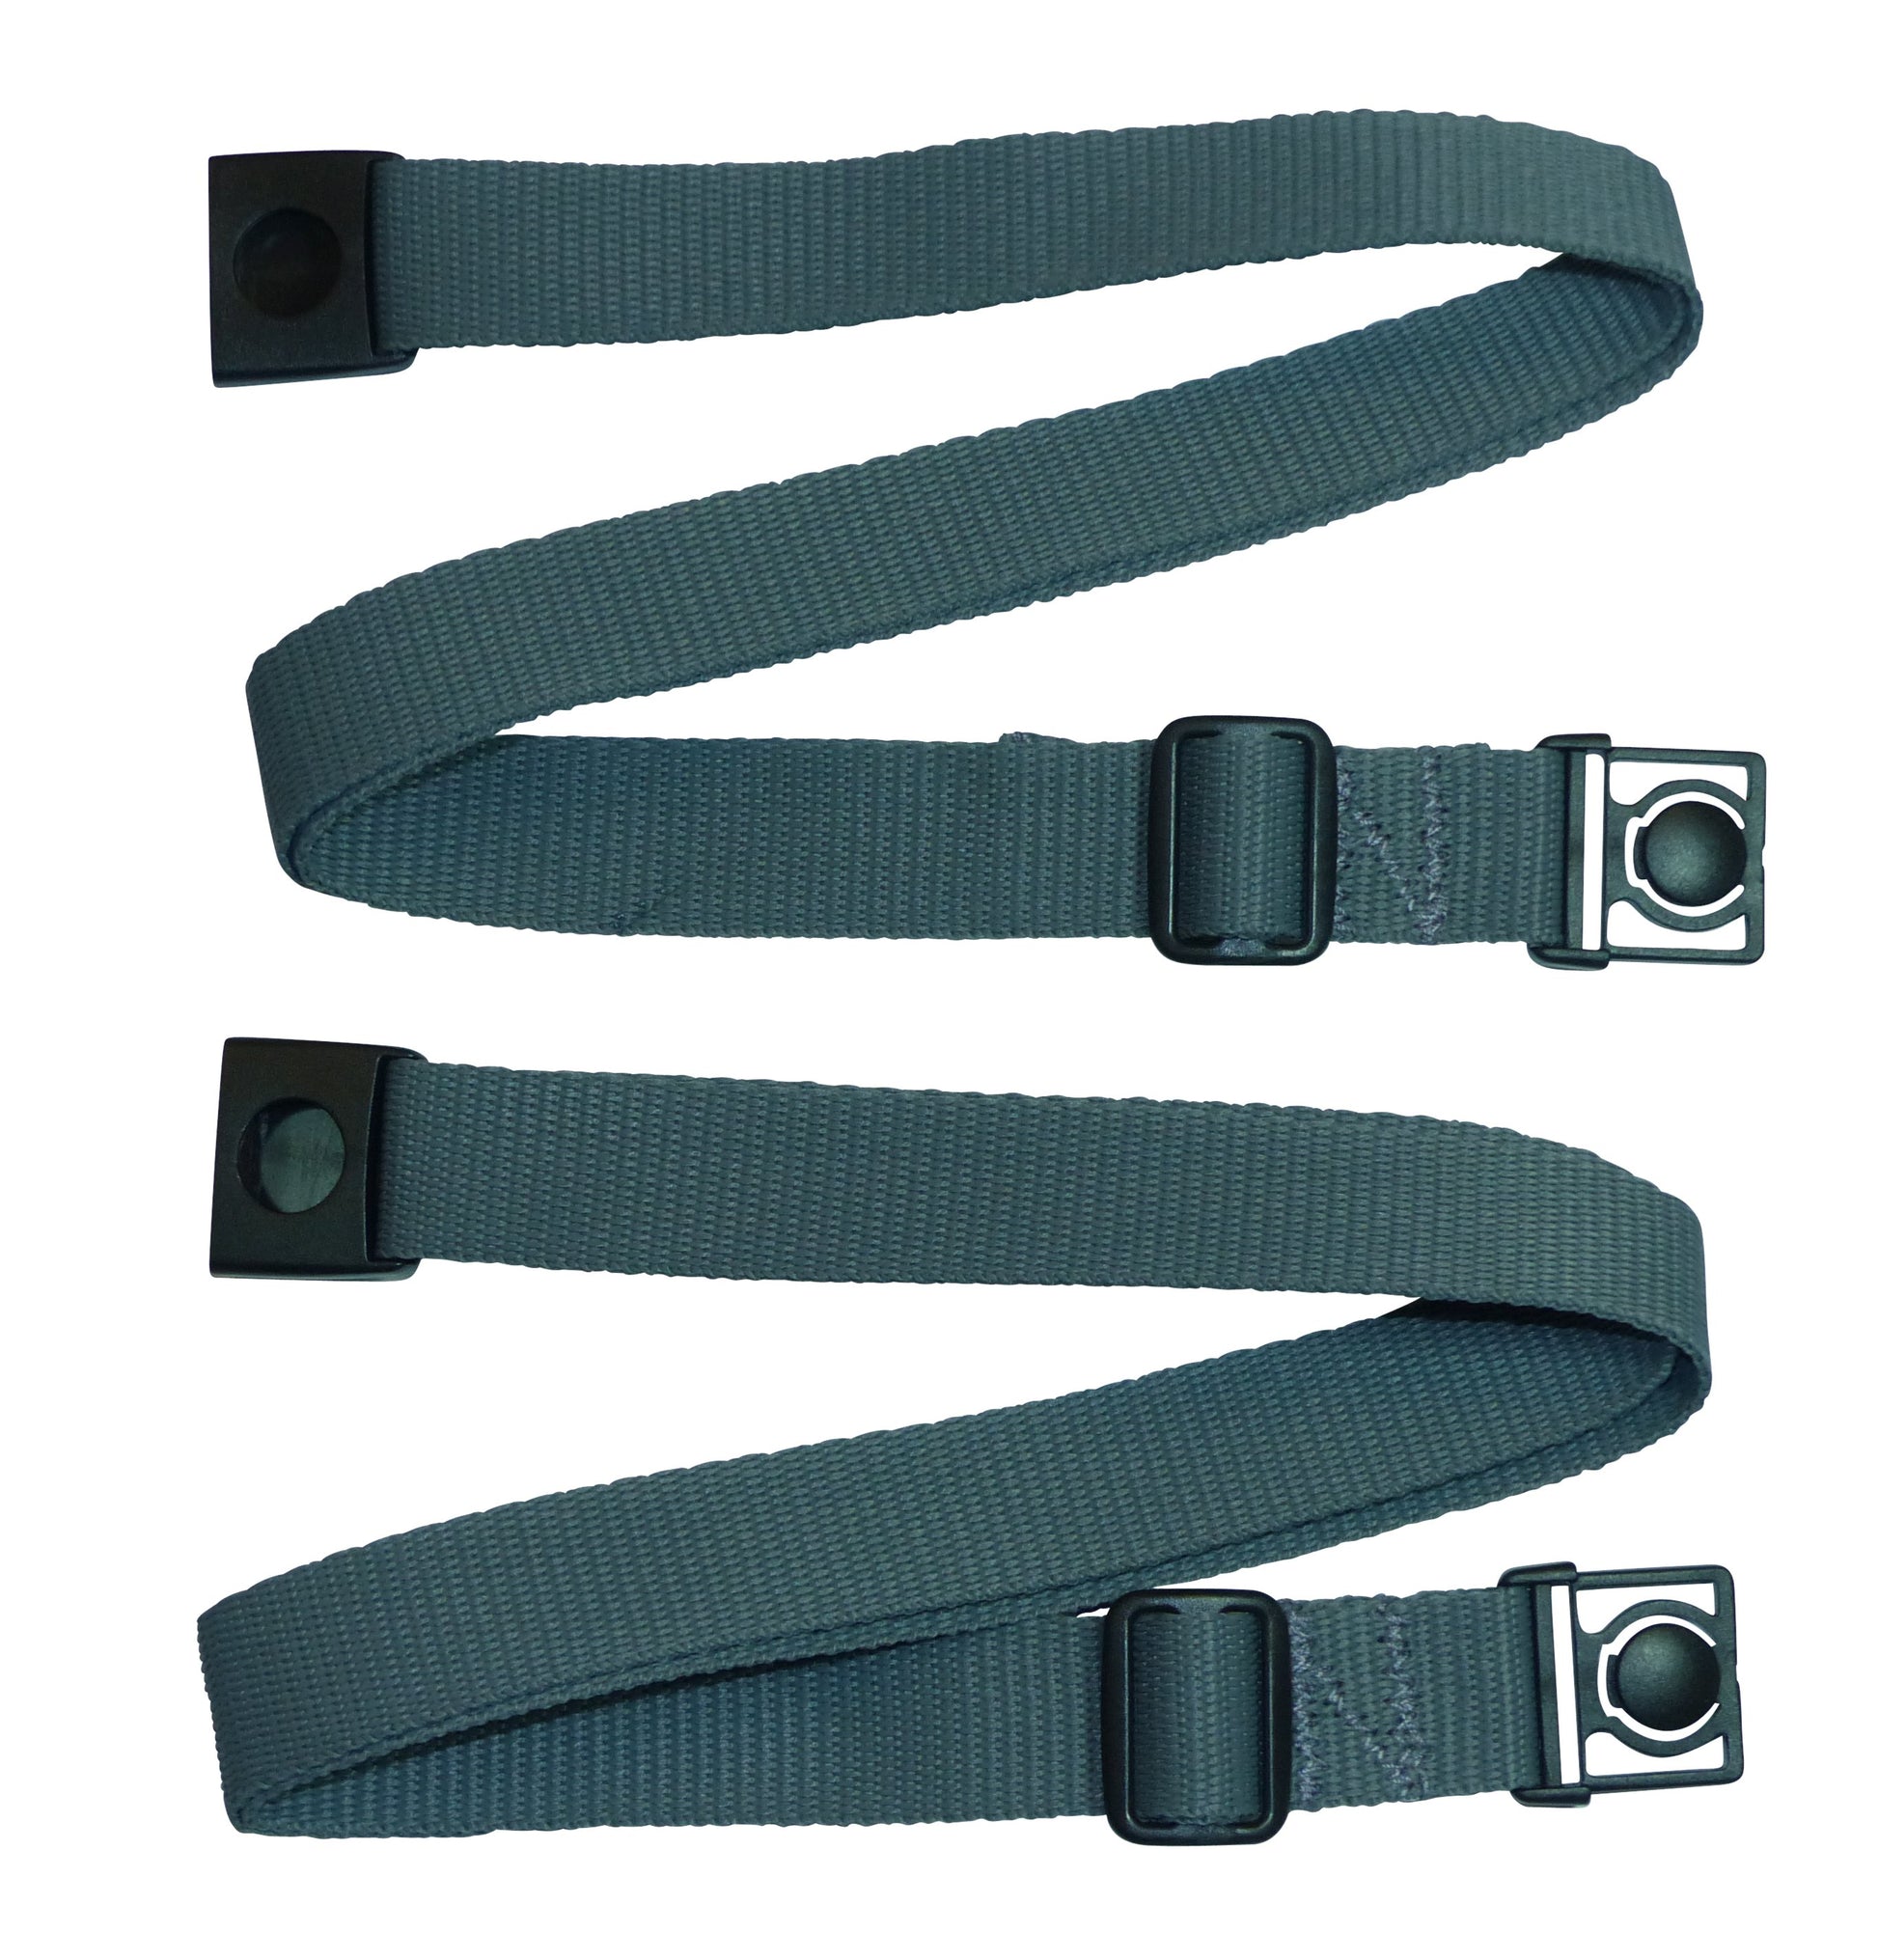 Benristraps 25mm Webbing Strap with Button Release and Triglide Slider Buckles (Pair) in Grey